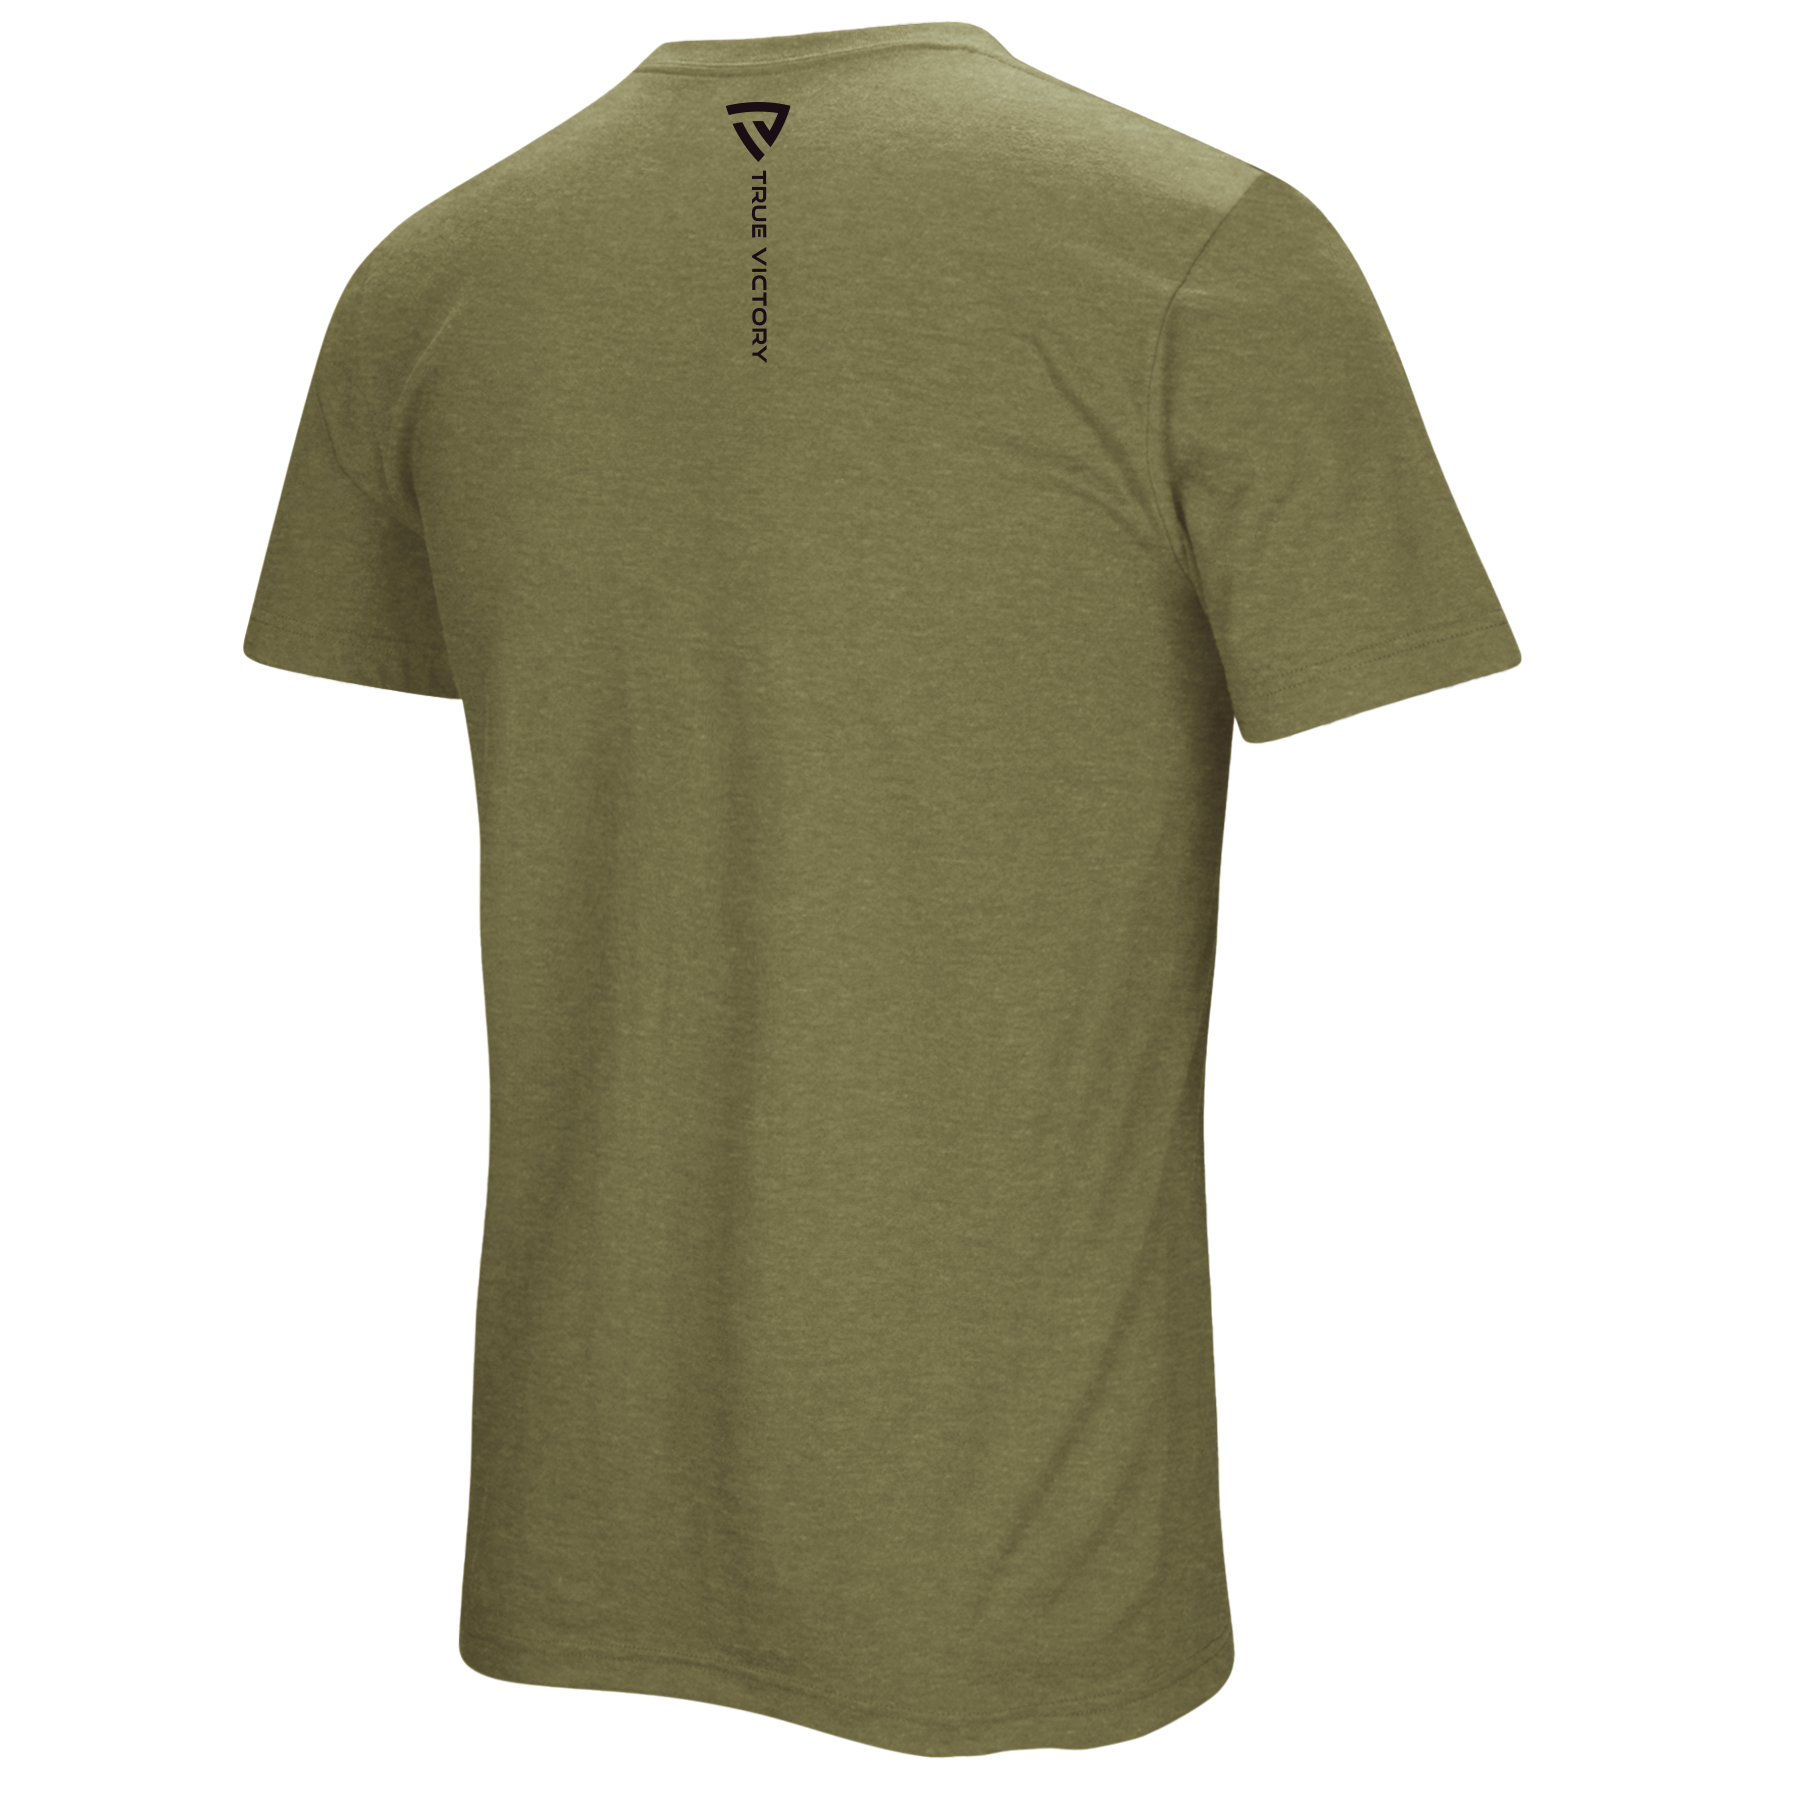 Men's Victorious Military Green Tee